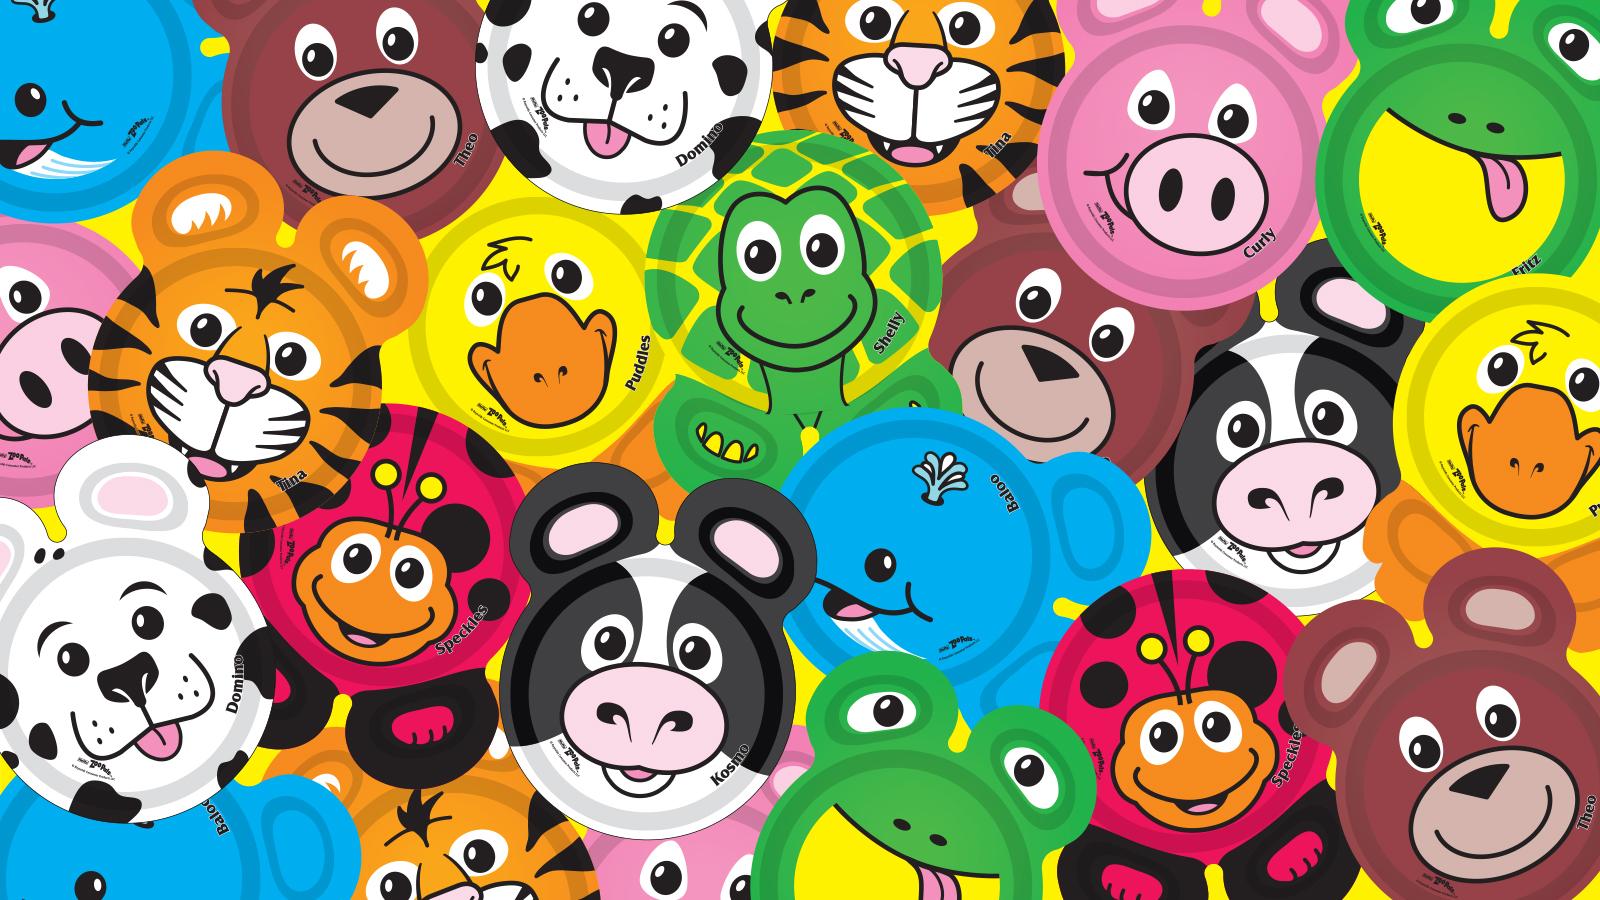 Hefty: Zoo Pals Plates Commercial! 